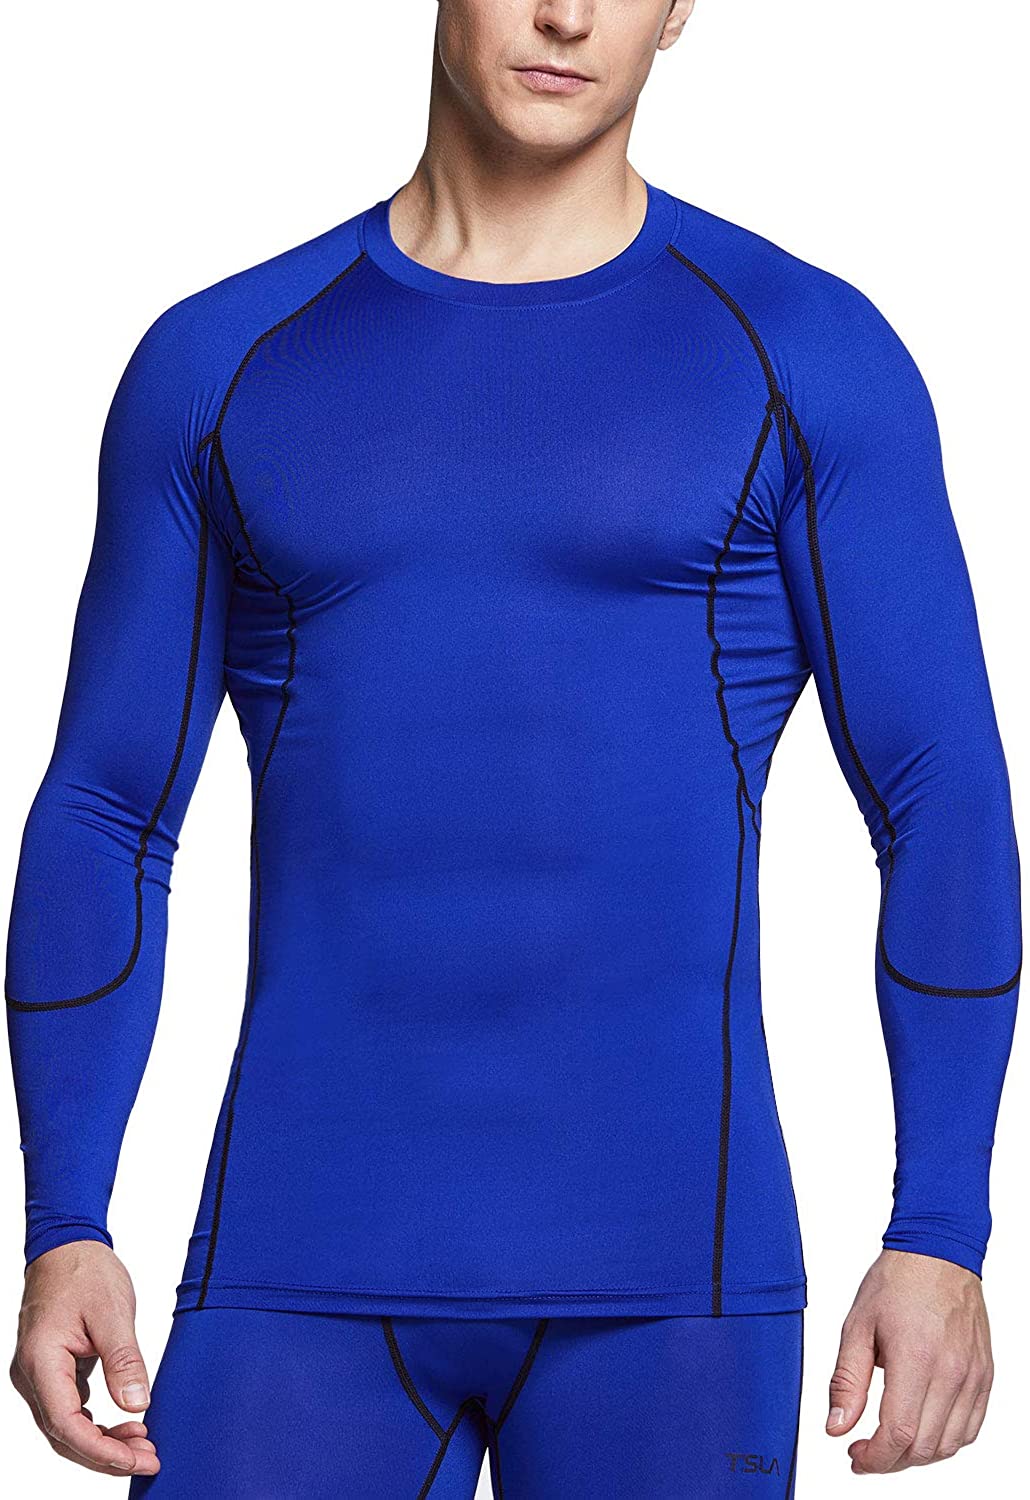 TSLA Men's Cool Dry Fit Long Sleeve Compression Shirts Athletic Workout Shirt Active Sports Base Layer T-Shirt 